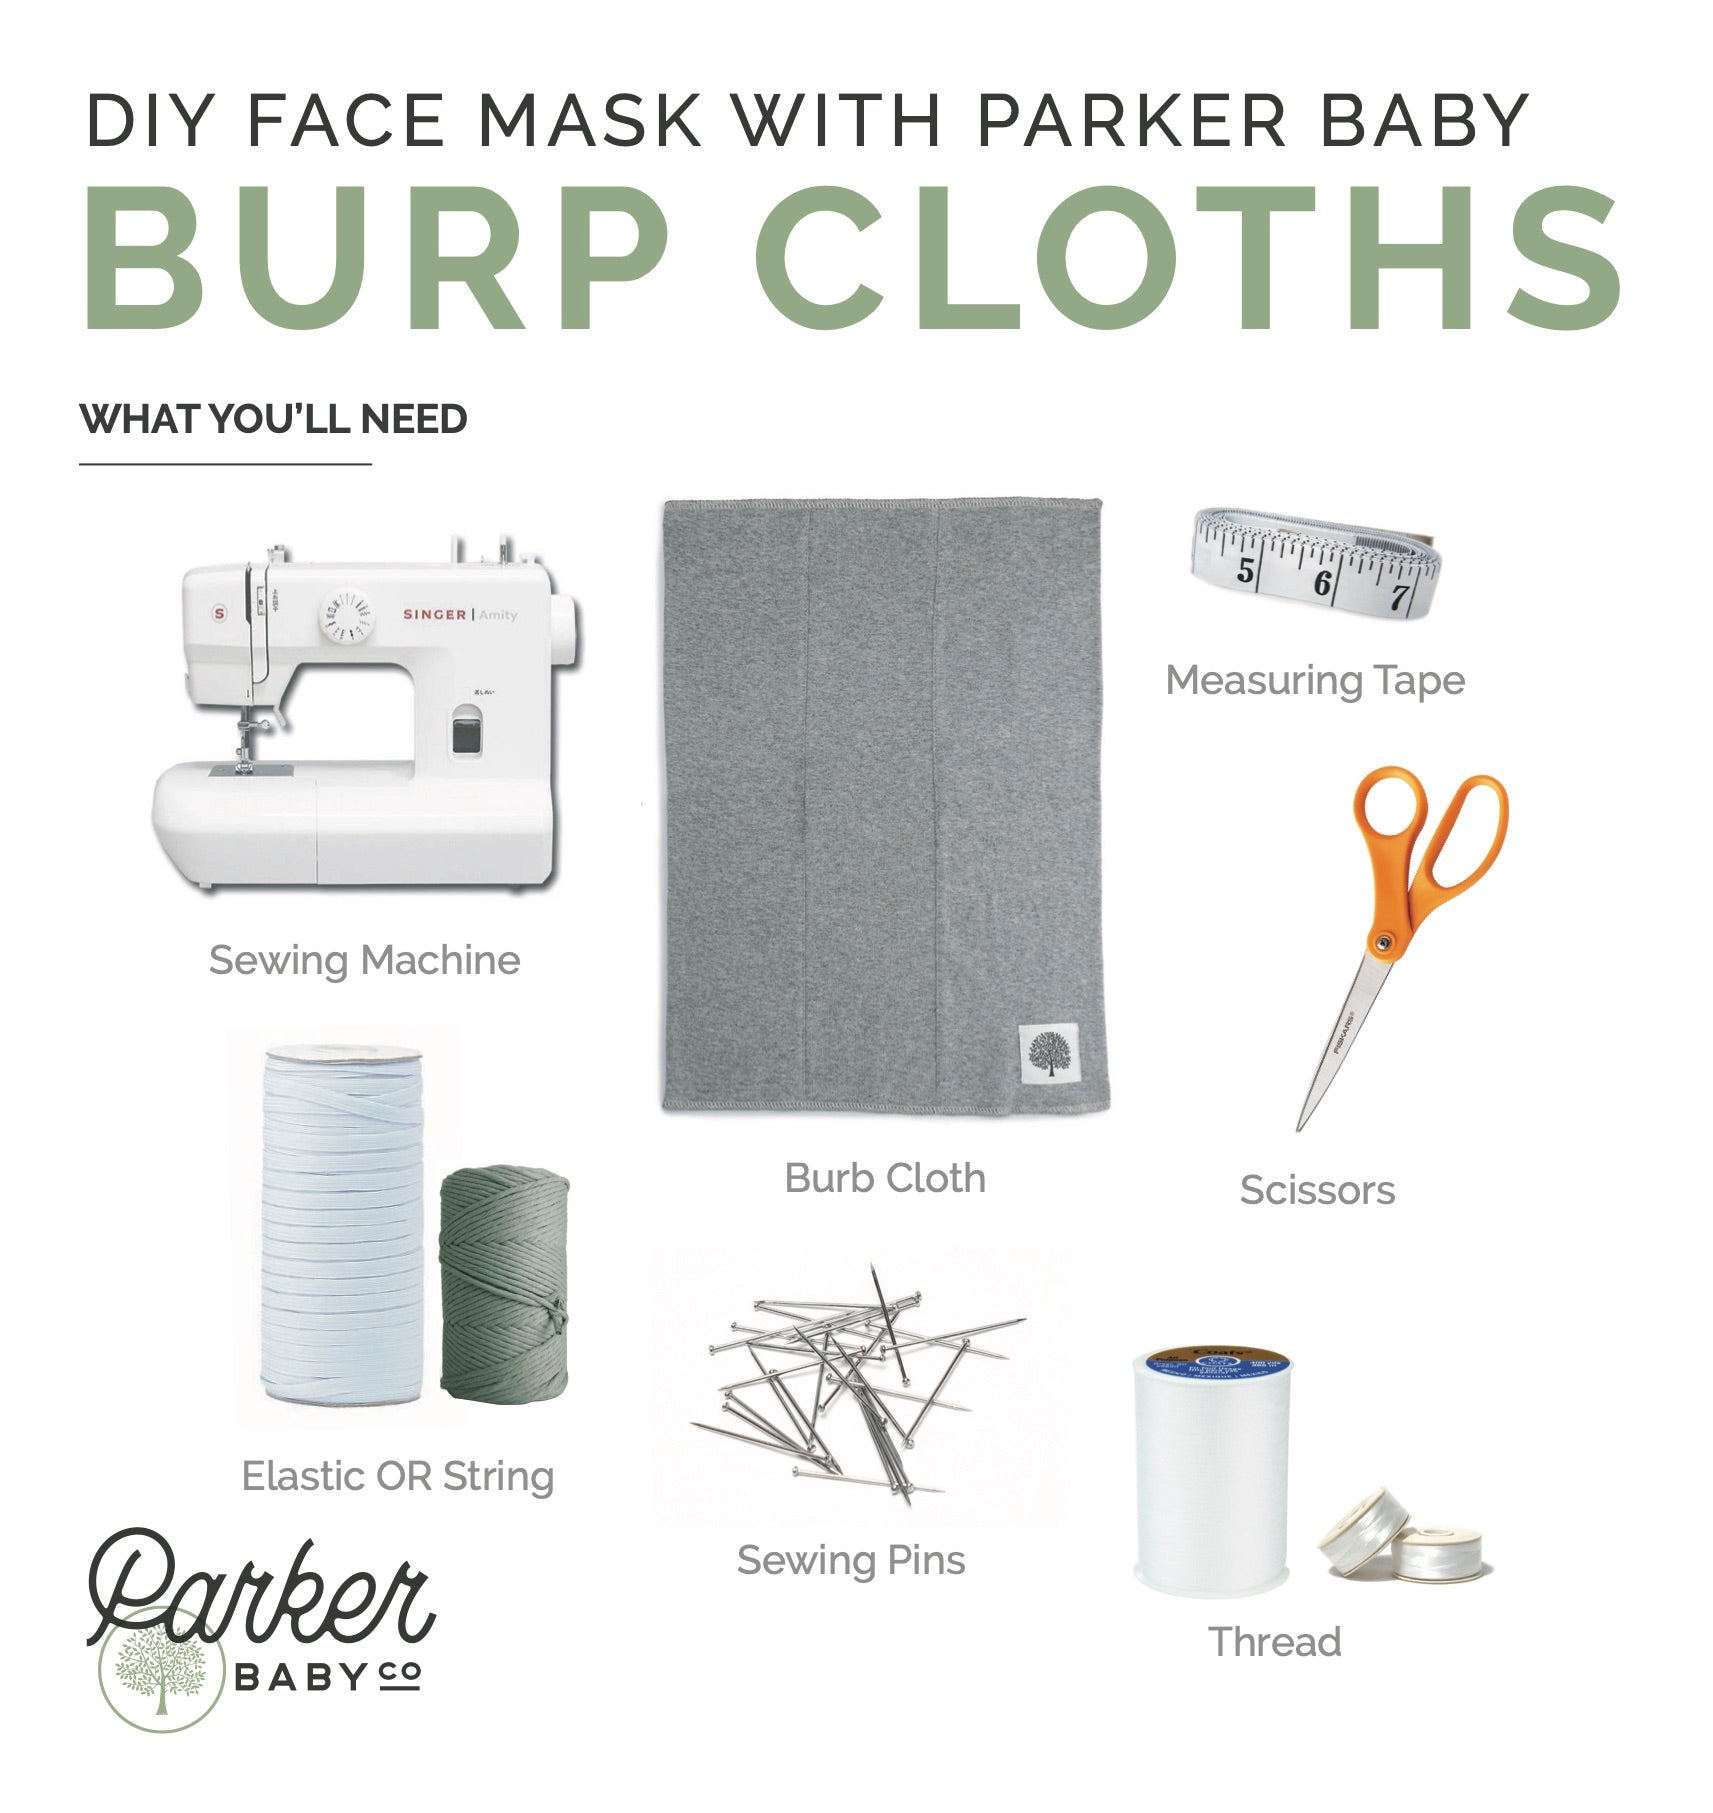 DIY Cloth Face Mask: step-by-step instructions